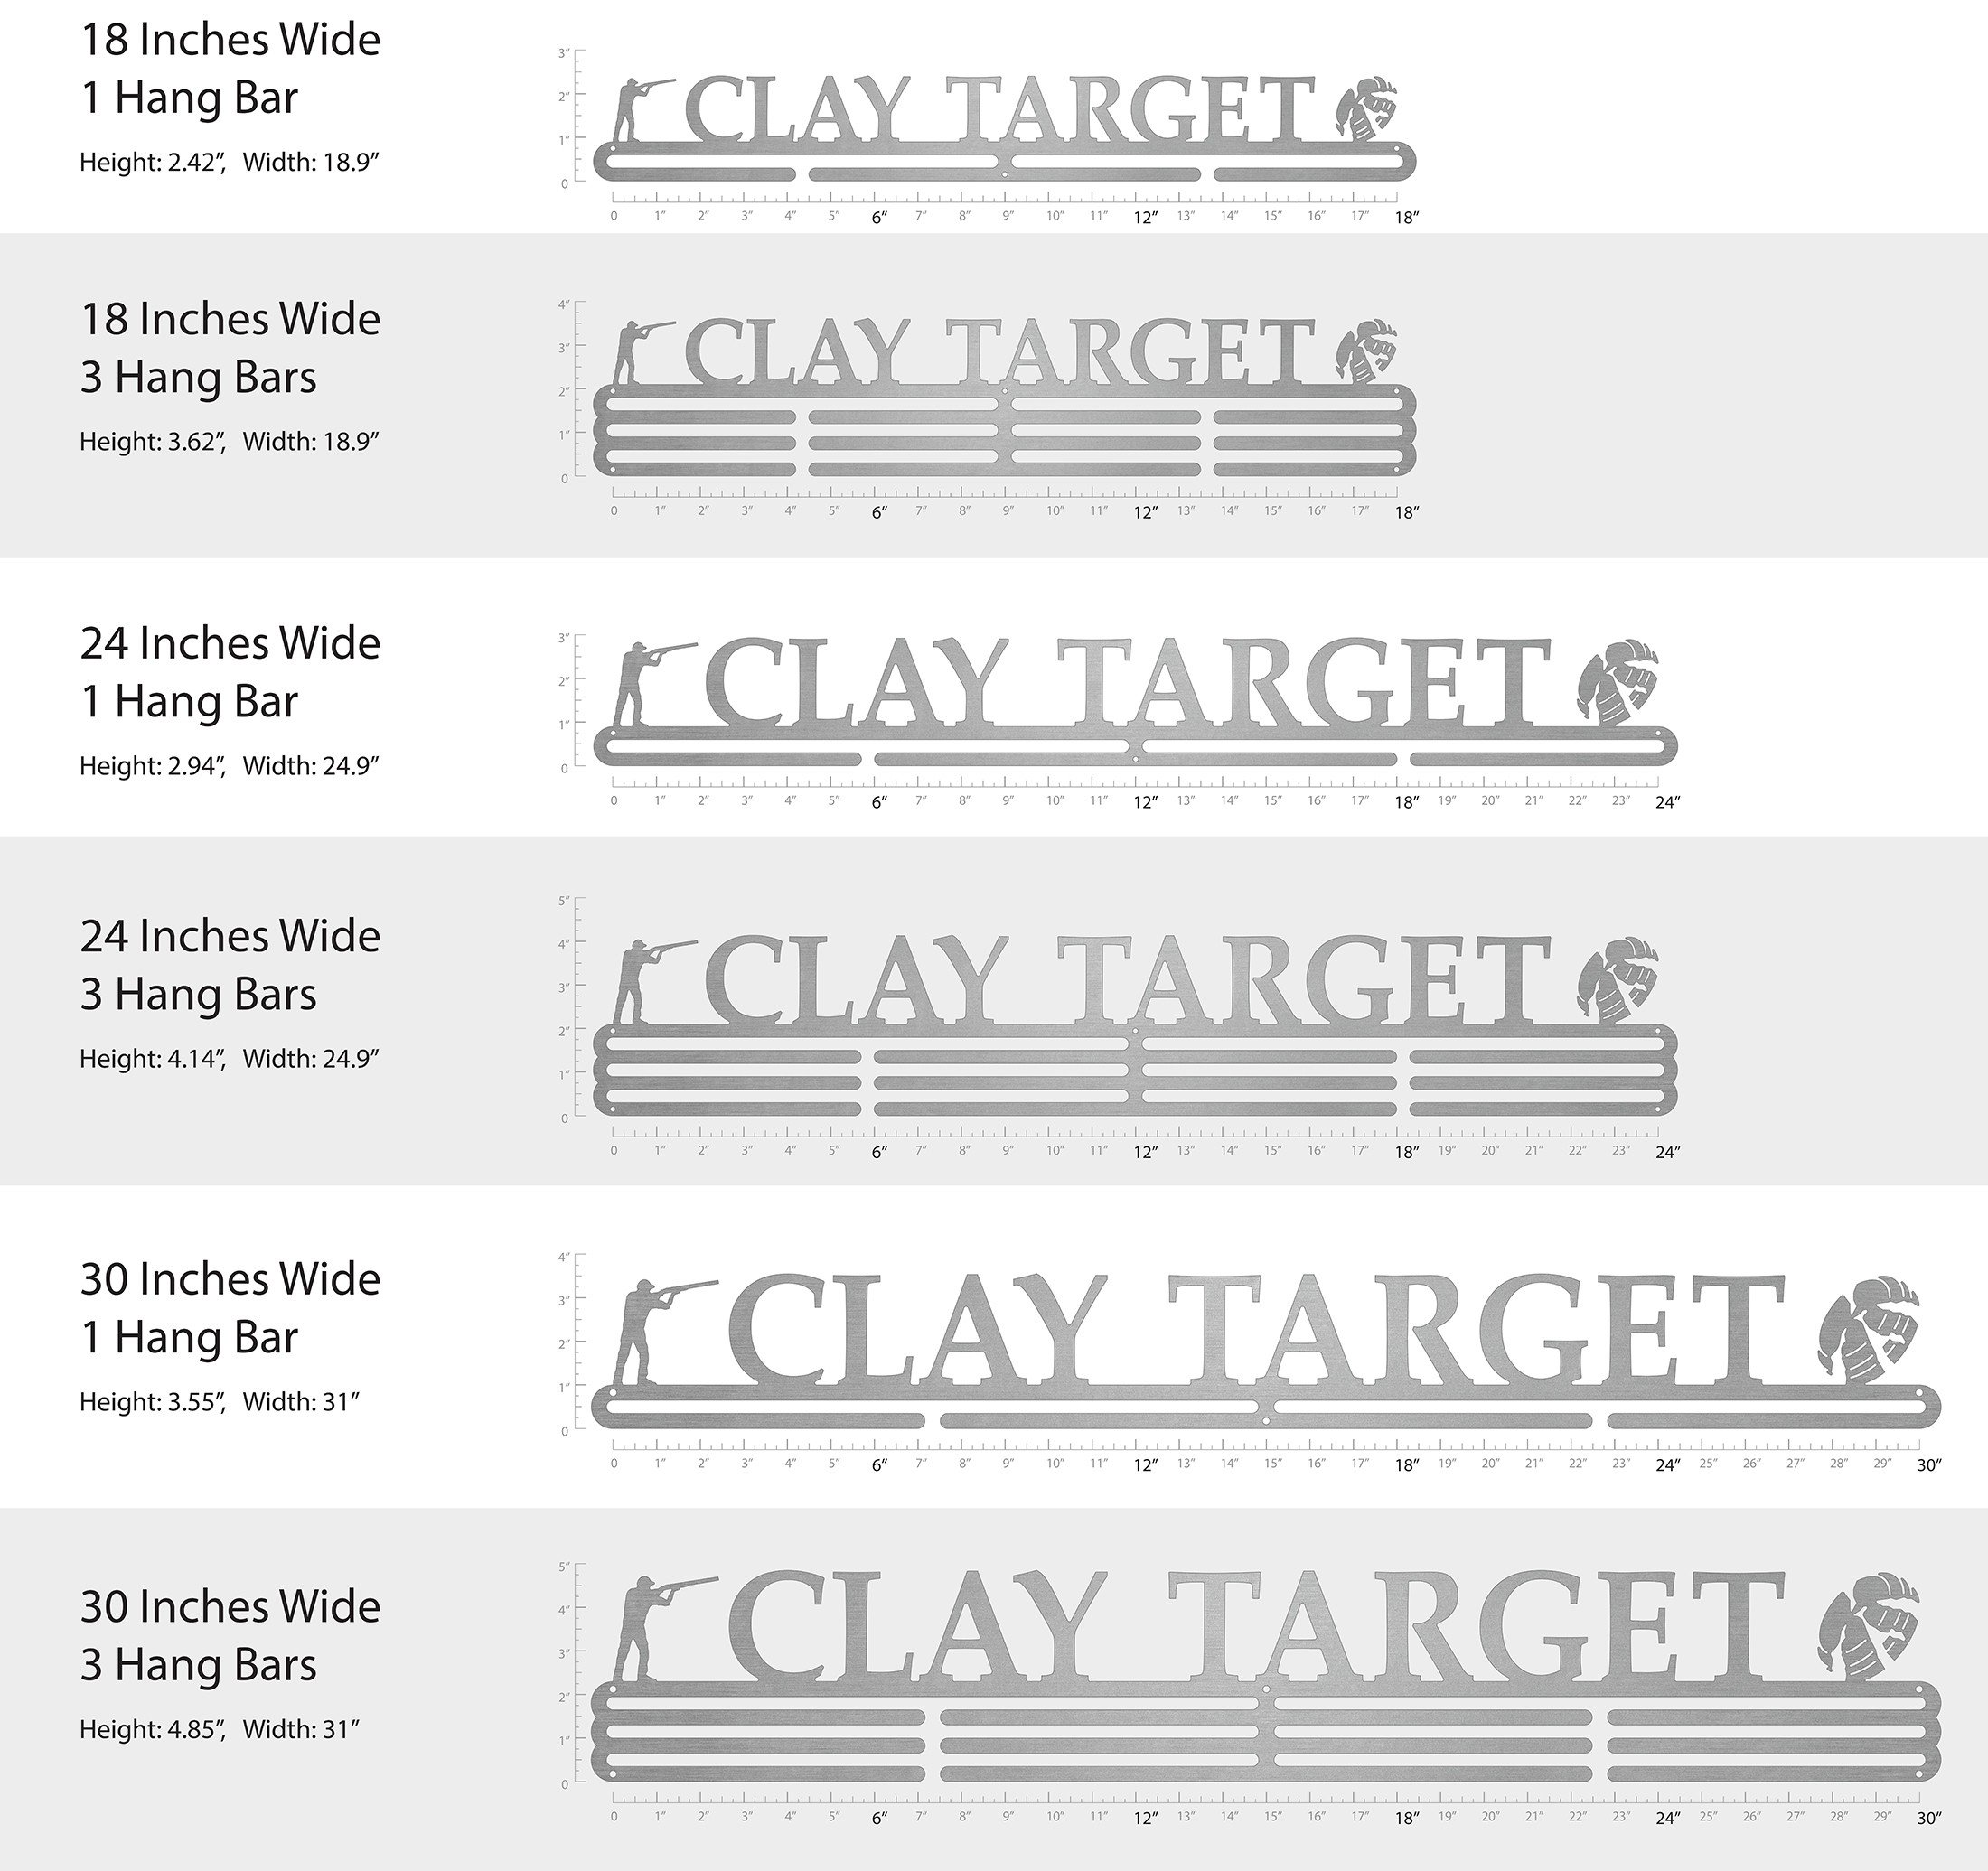 Clay Target